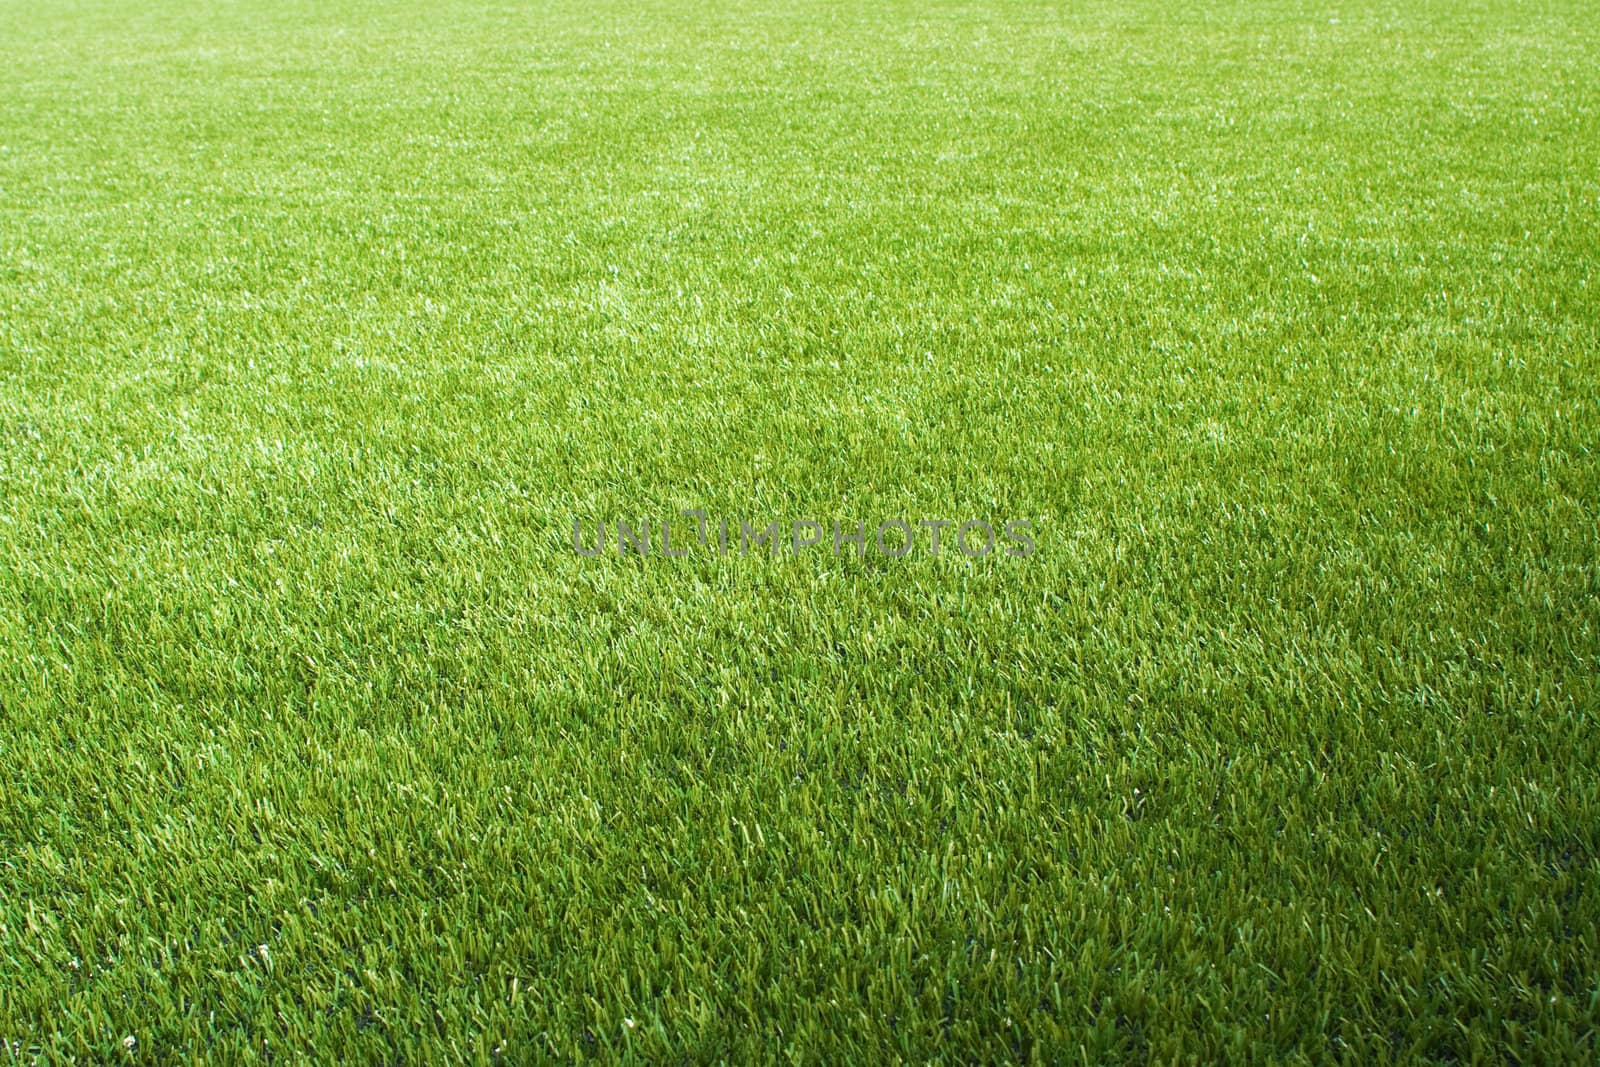 Artificial lawn on the foolball/soccer field by tsvgloom